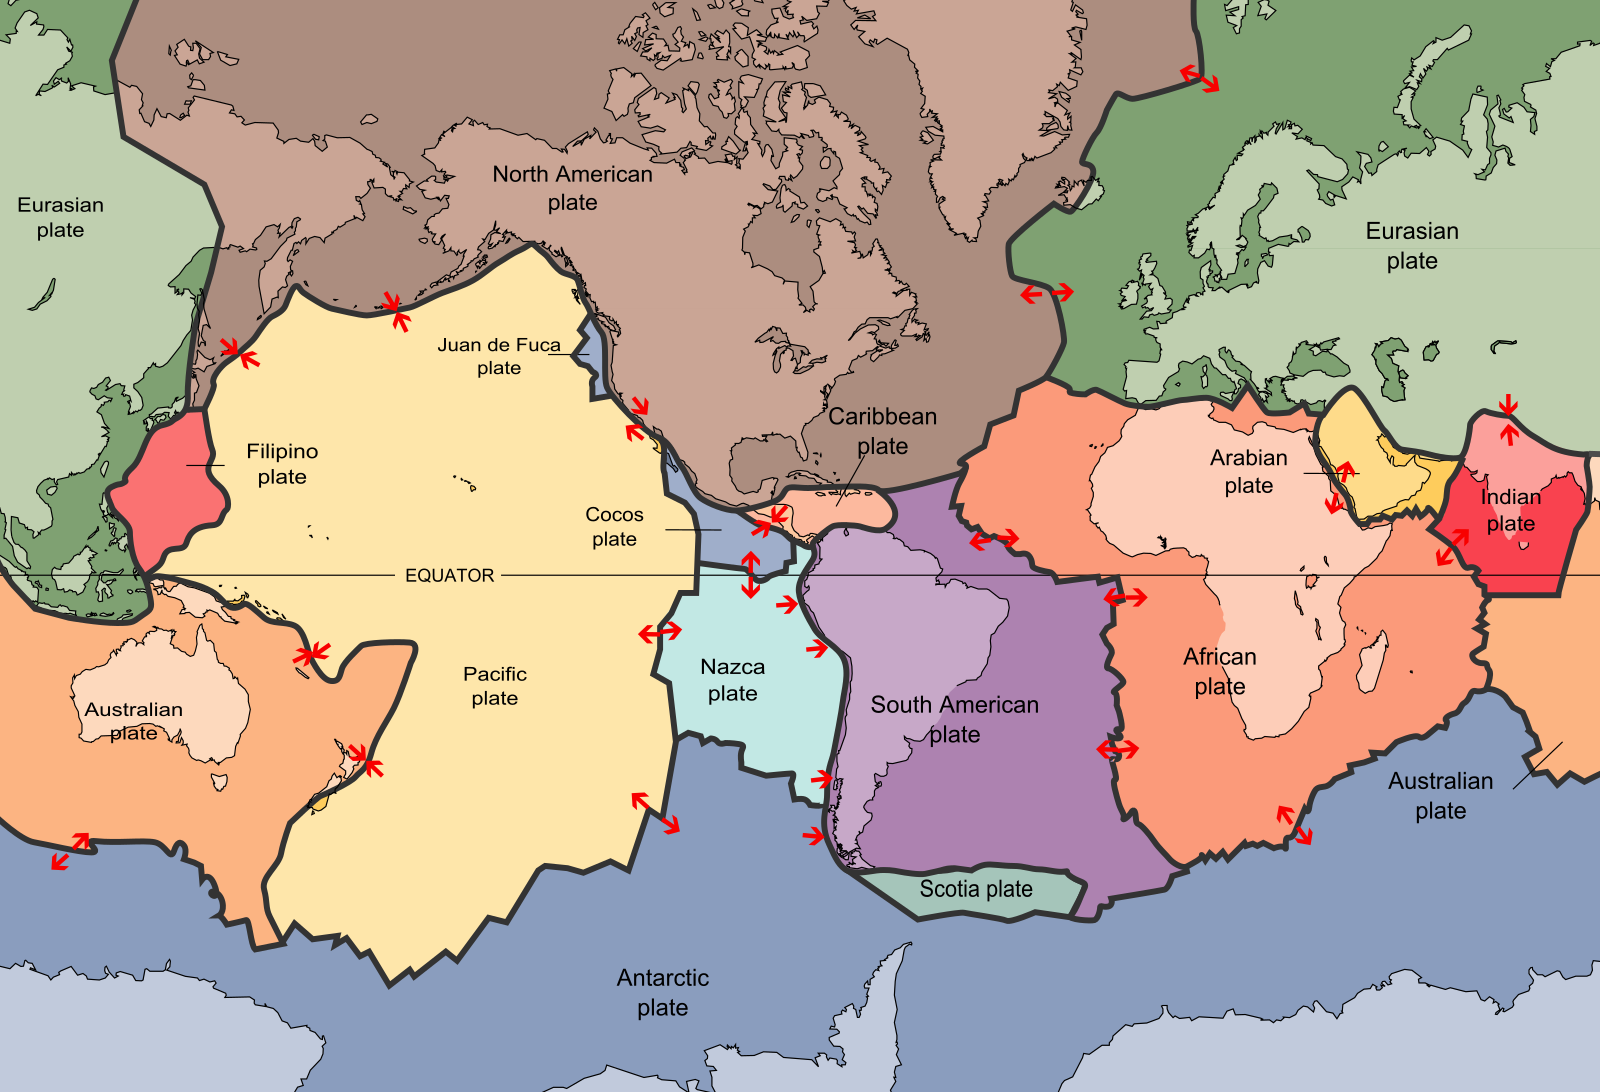 World map divided into lithospheric plates.